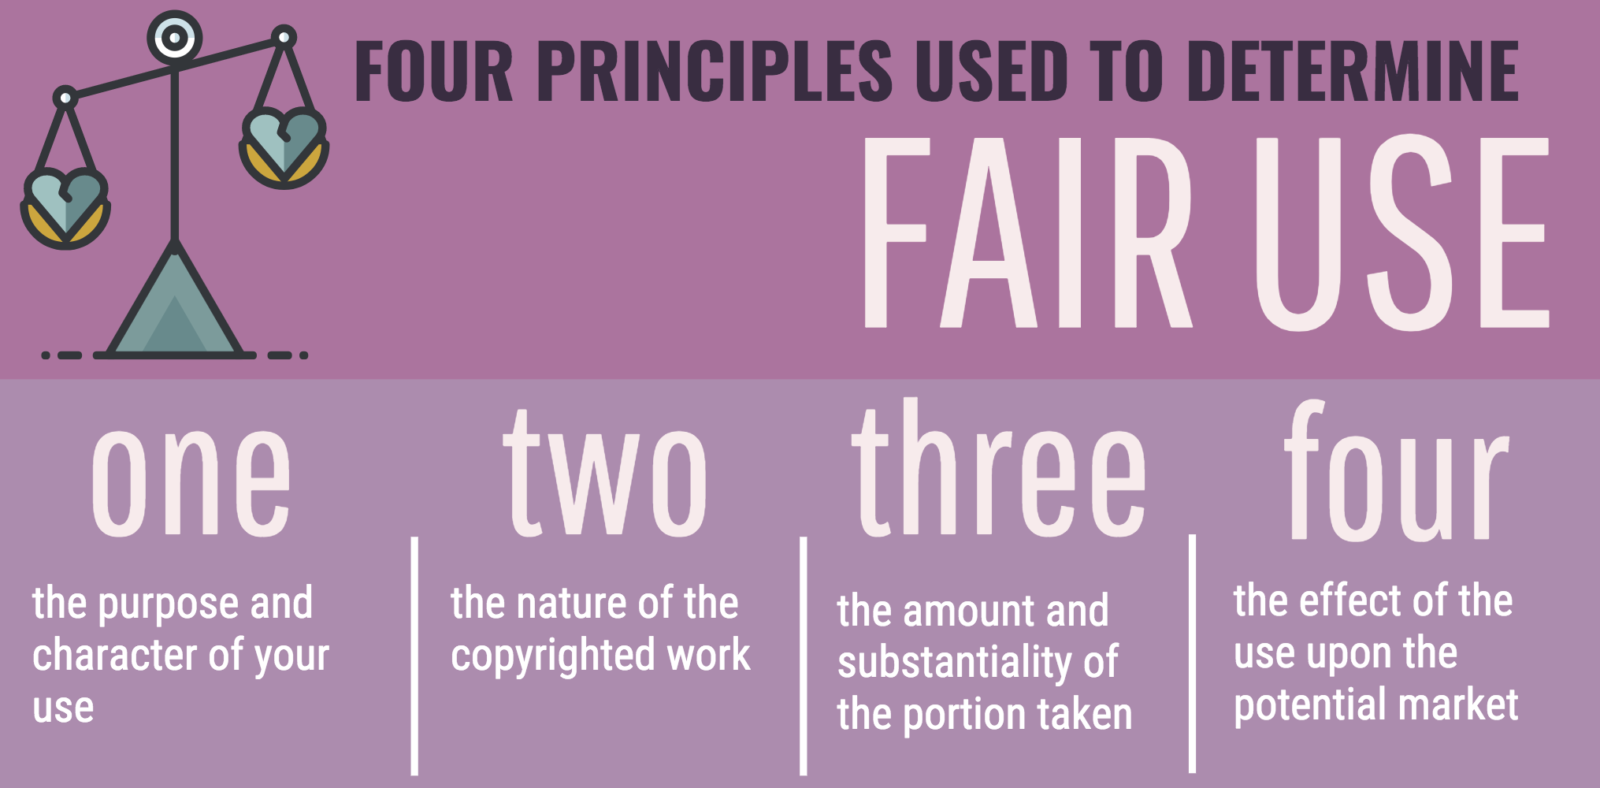 Four Principles Used to Determine Fair Use: one: the purpose and character of your use; 2: the nature of the copyrighted work; 3: the amount and substantiality of the portion taken; 4: the effect of the use upon the potential market